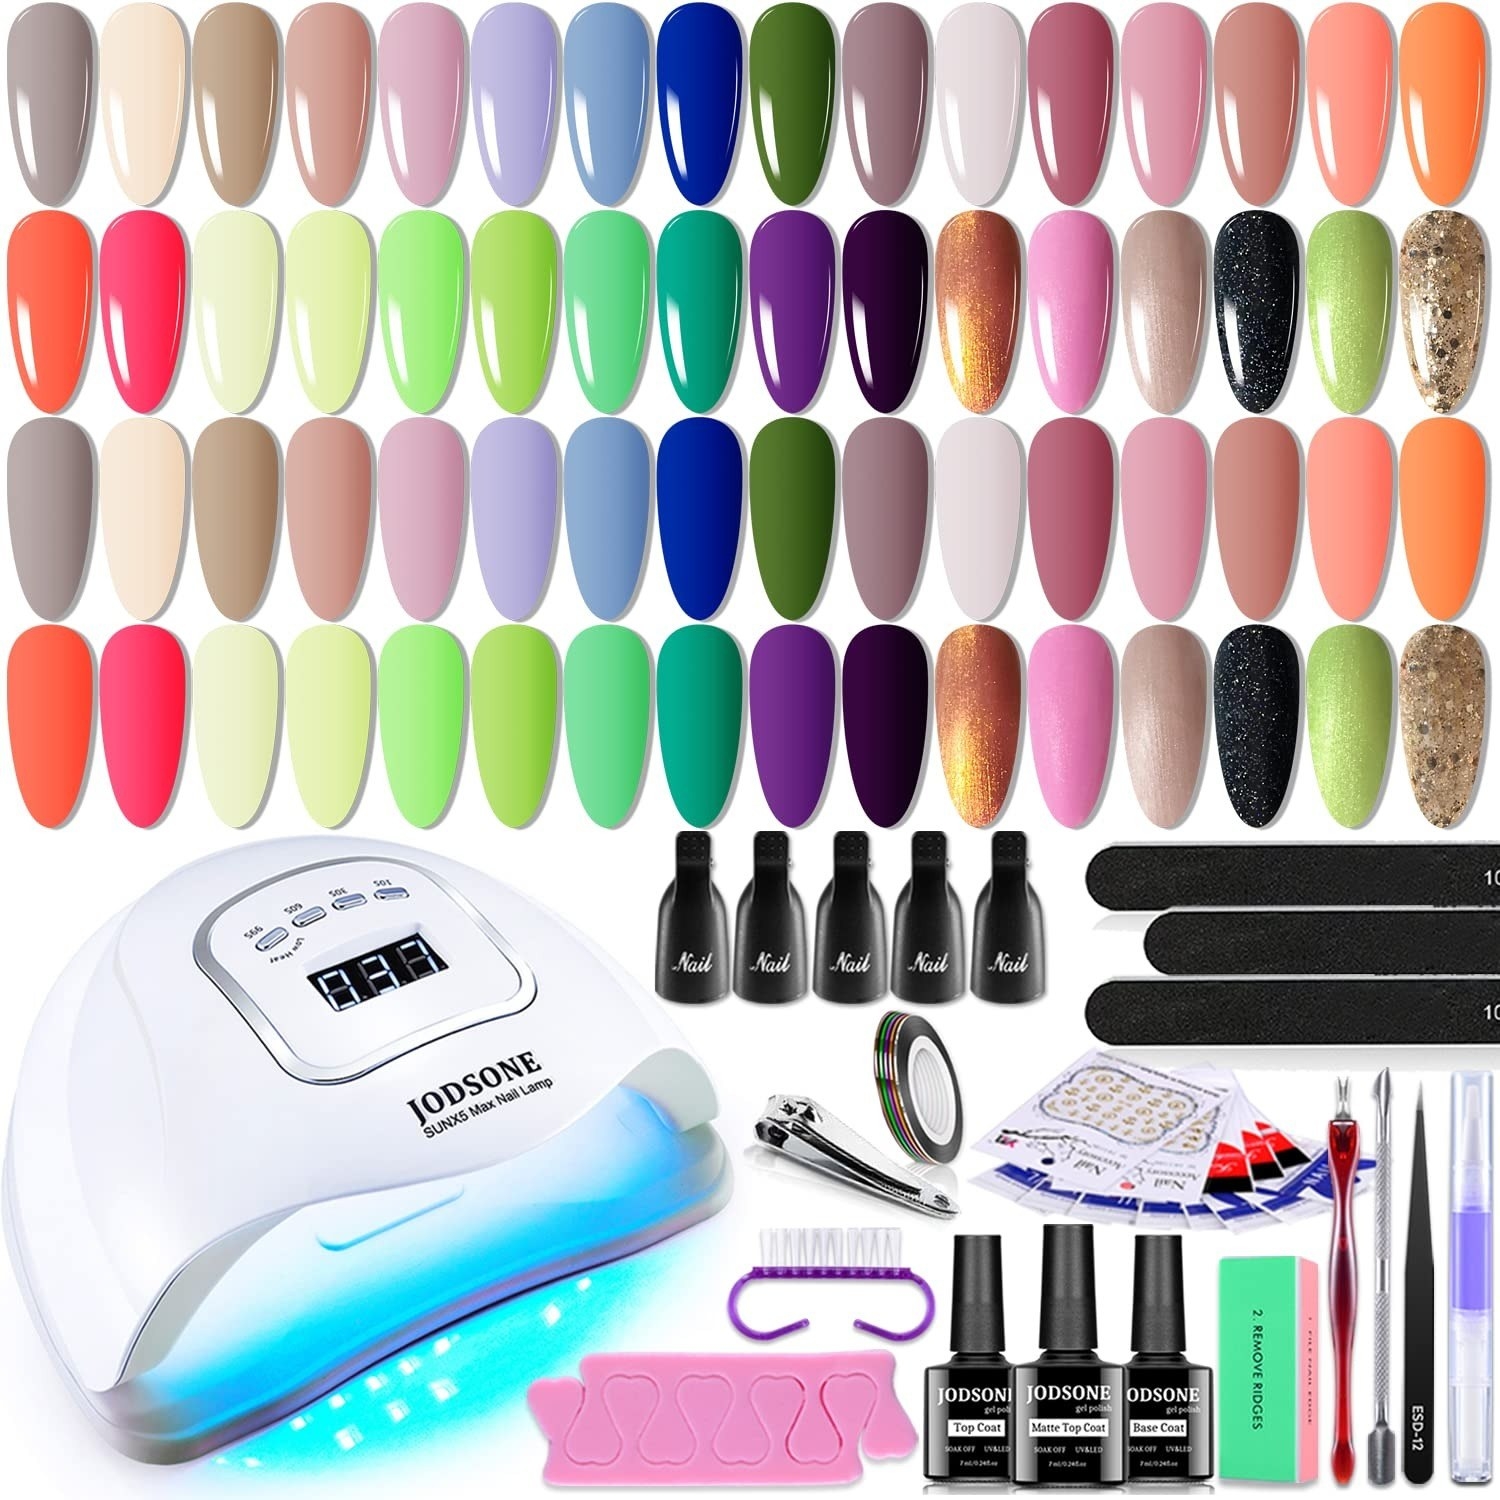 32 nail colors swatches, a uv light, and the other nail accessories include din the kit